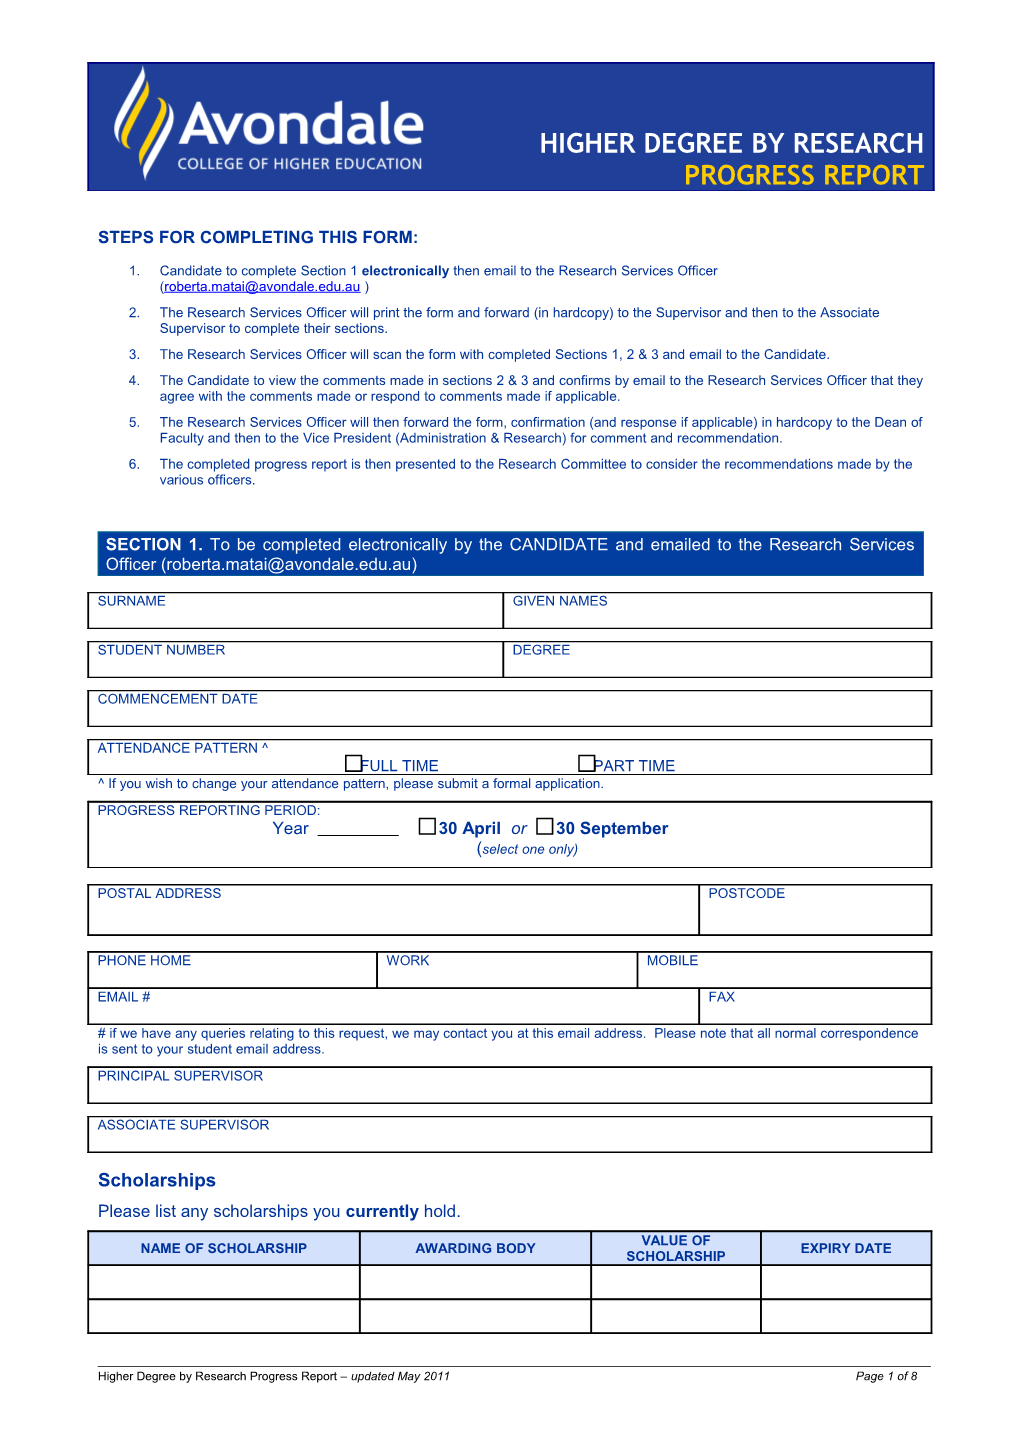 Steps for Completing This Form